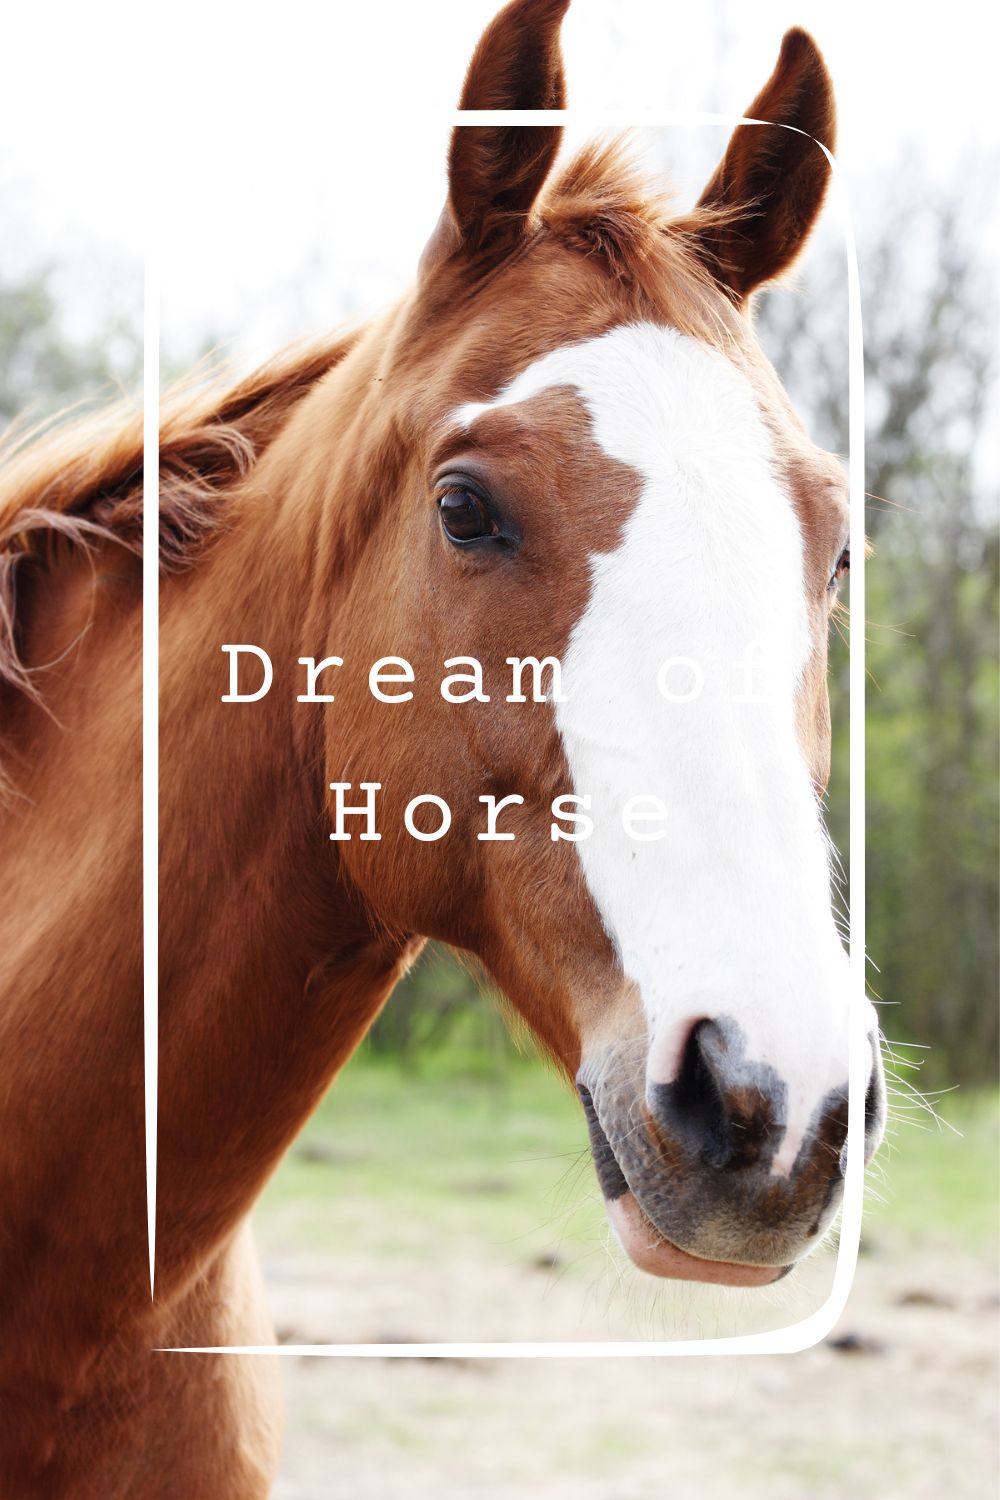 11 Dream of Horse Meanings4